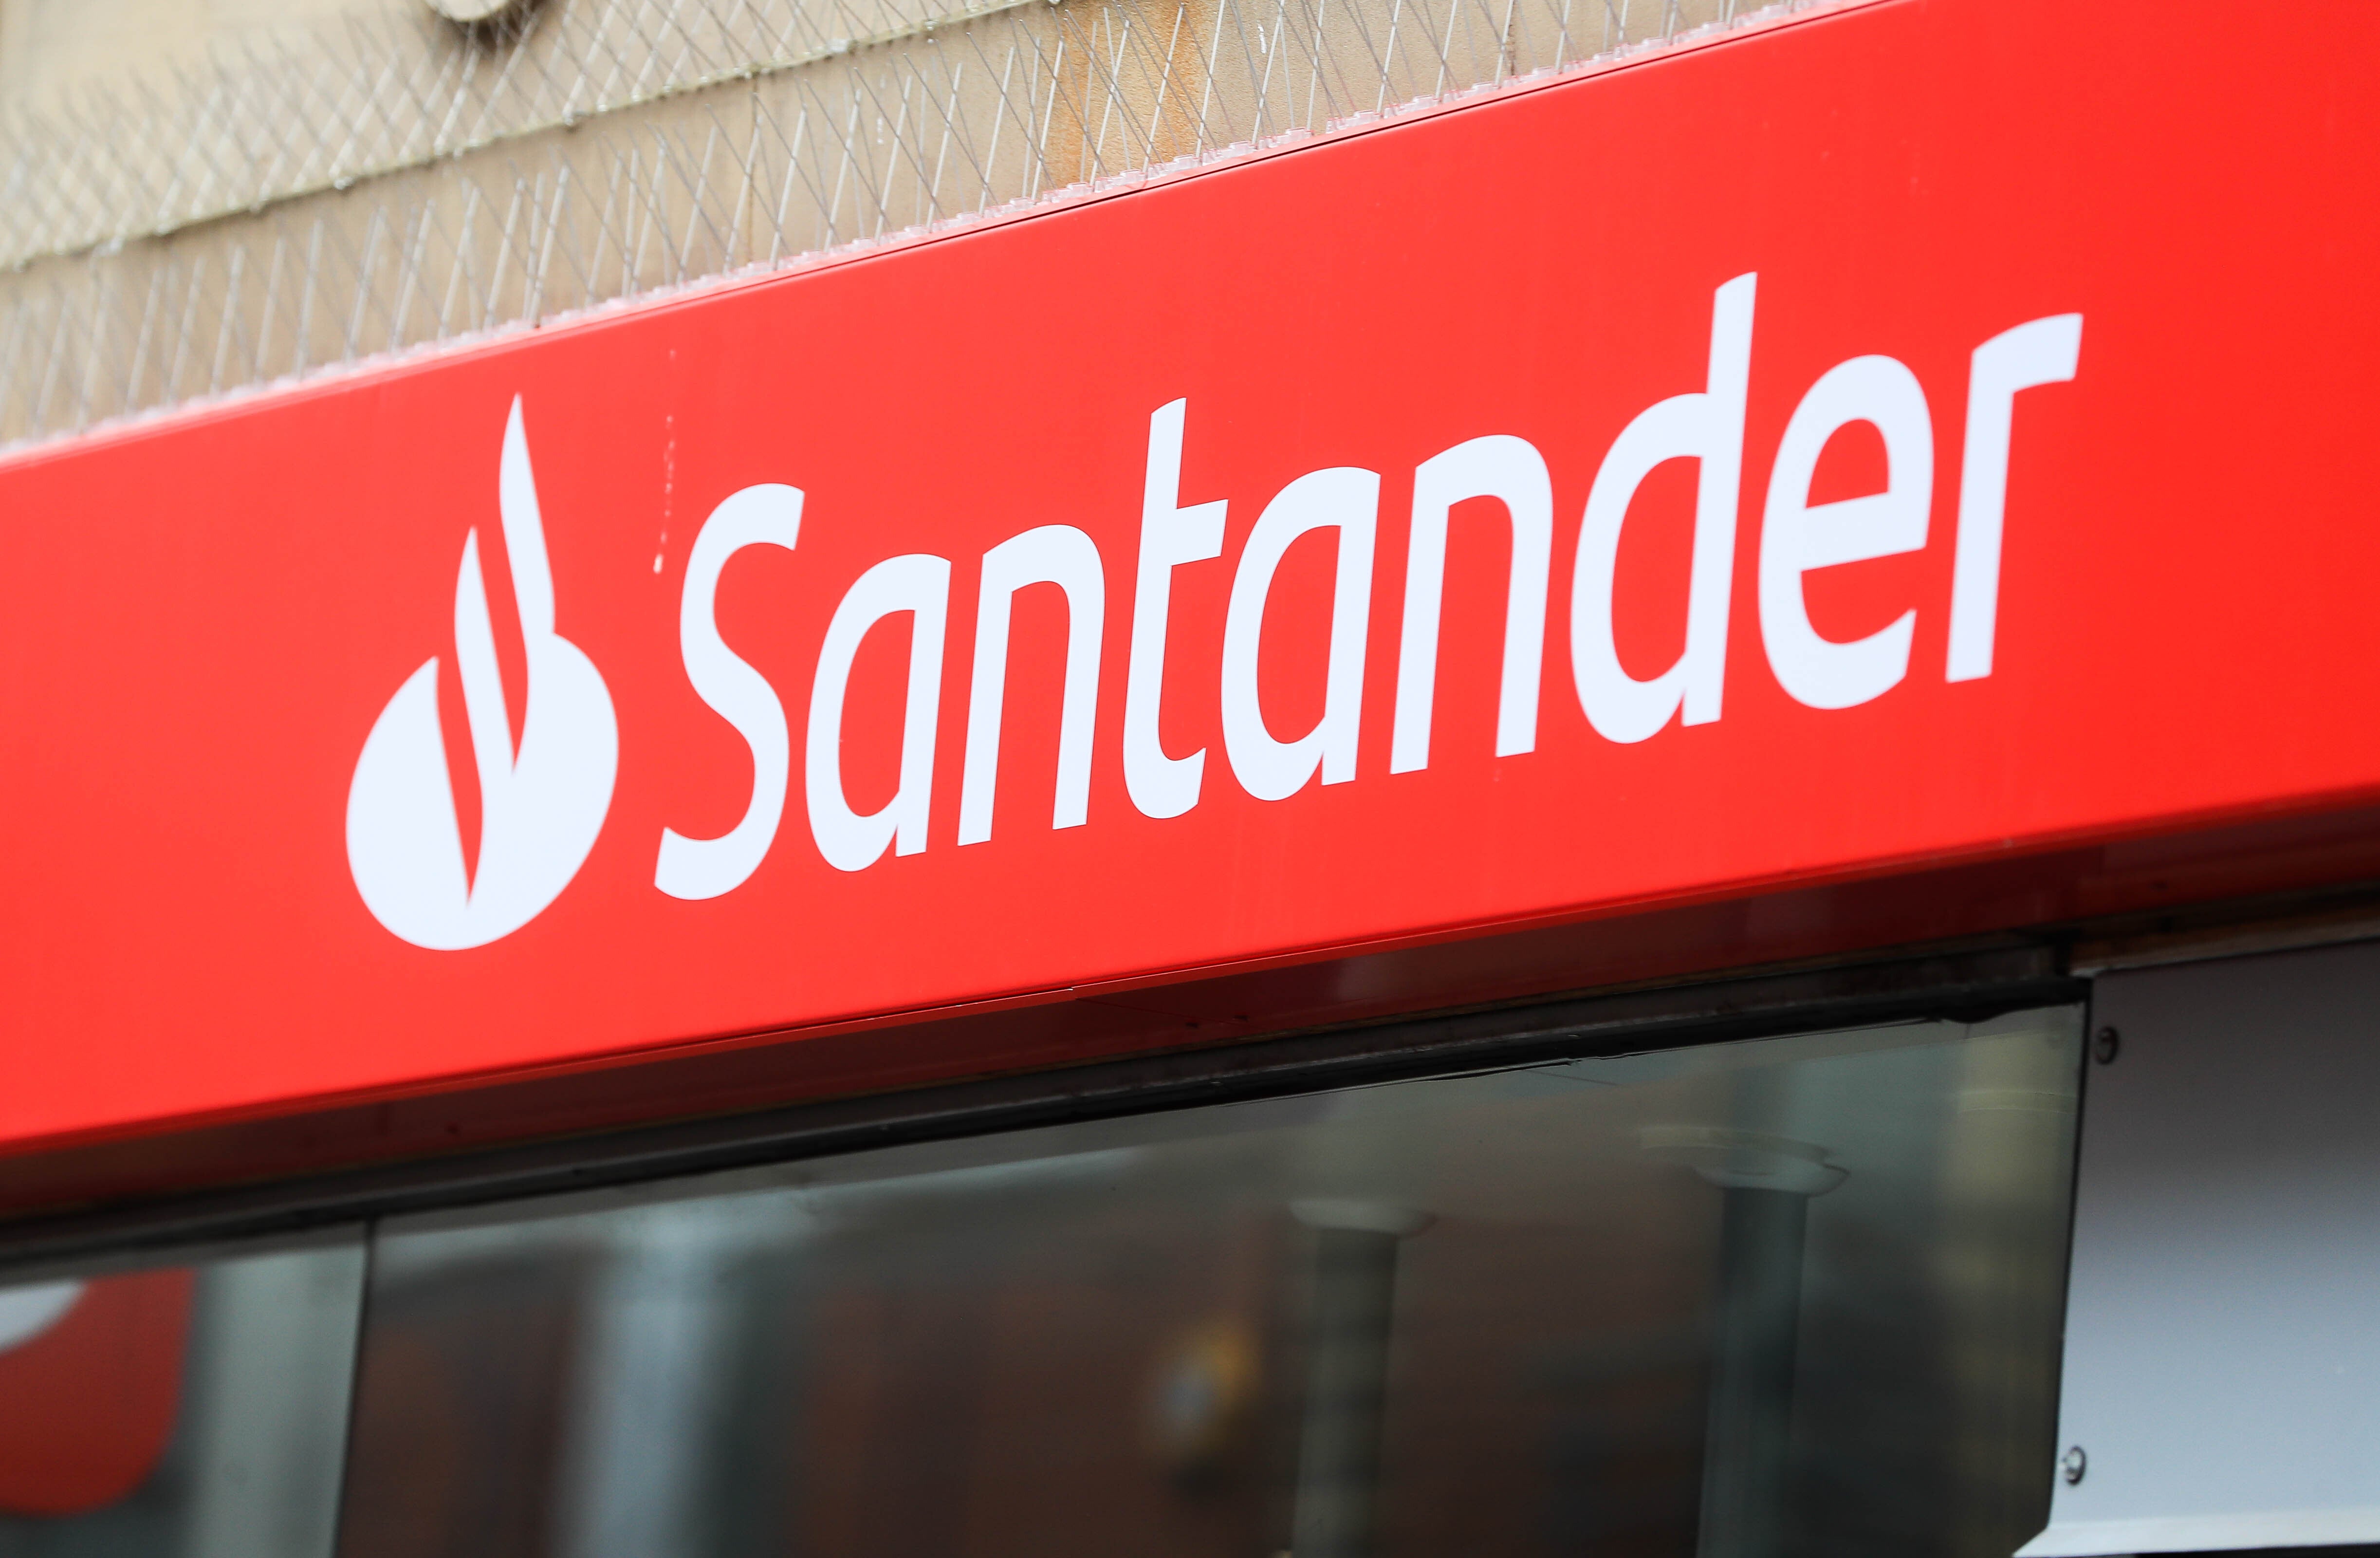 Santander is reducing its branch opening hours starting July